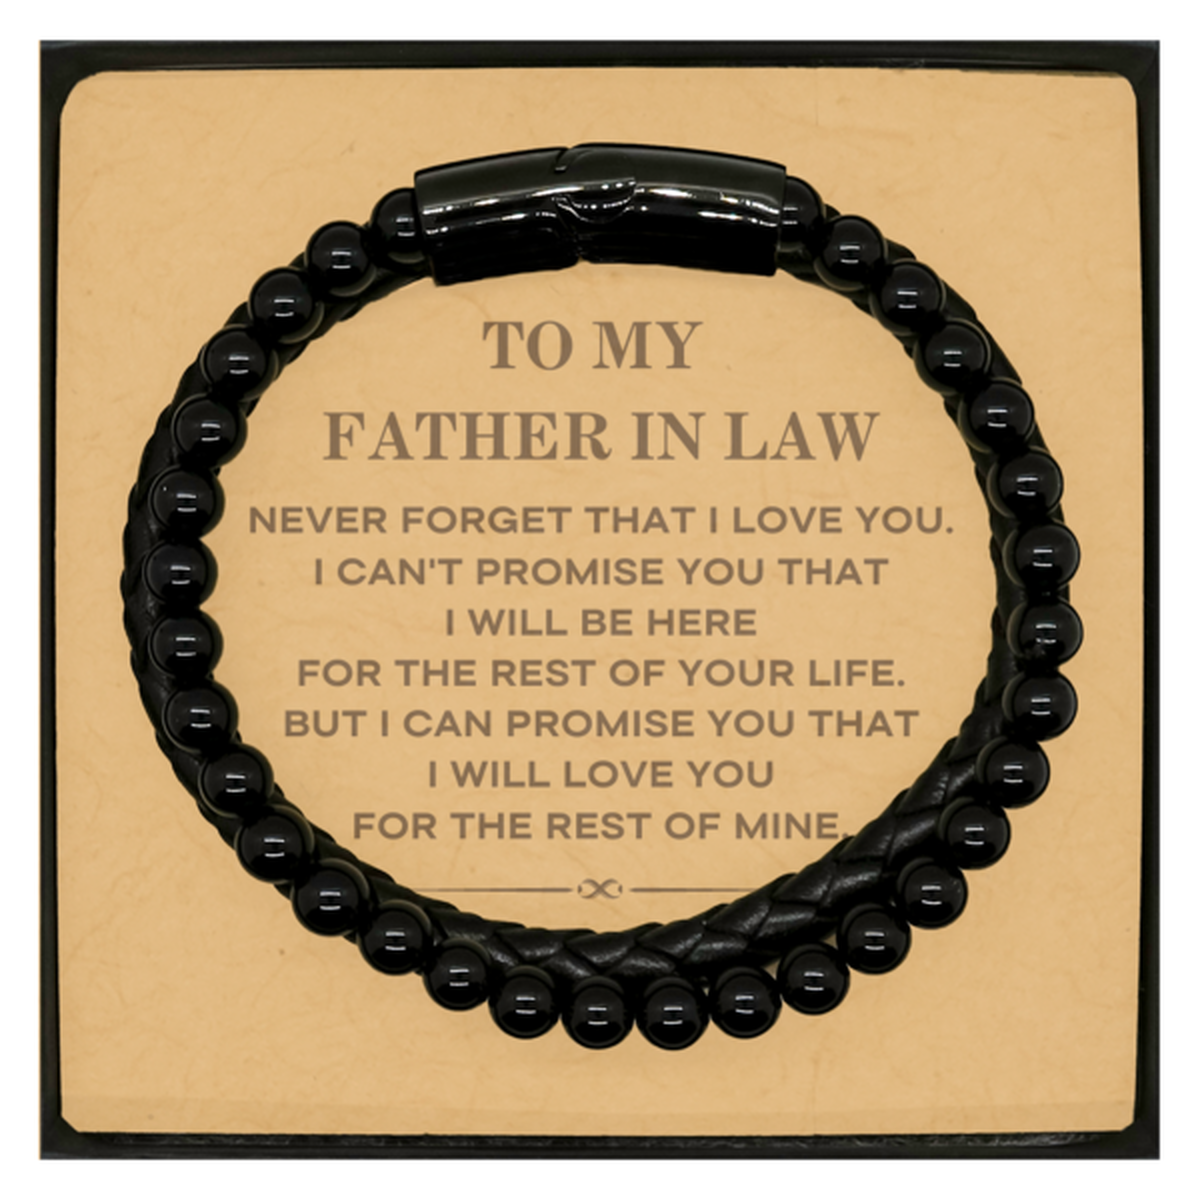 To My Father In Law Gifts, I will love you for the rest of mine, Love Father In Law Bracelet, Birthday Christmas Unique Stone Leather Bracelets For Father In Law